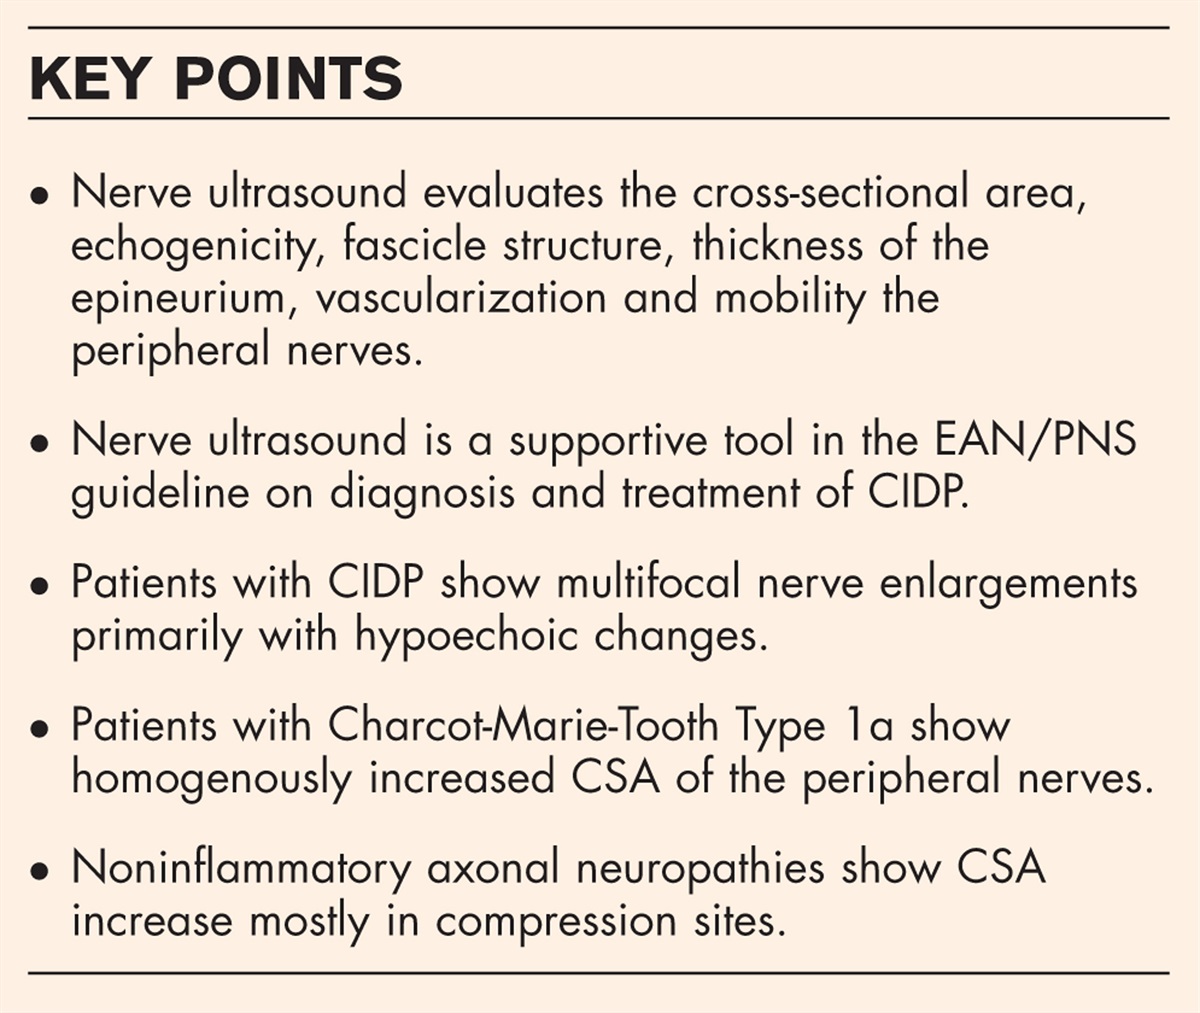 Nerve ultrasound for the diagnosis and follow-up of peripheral neuropathies